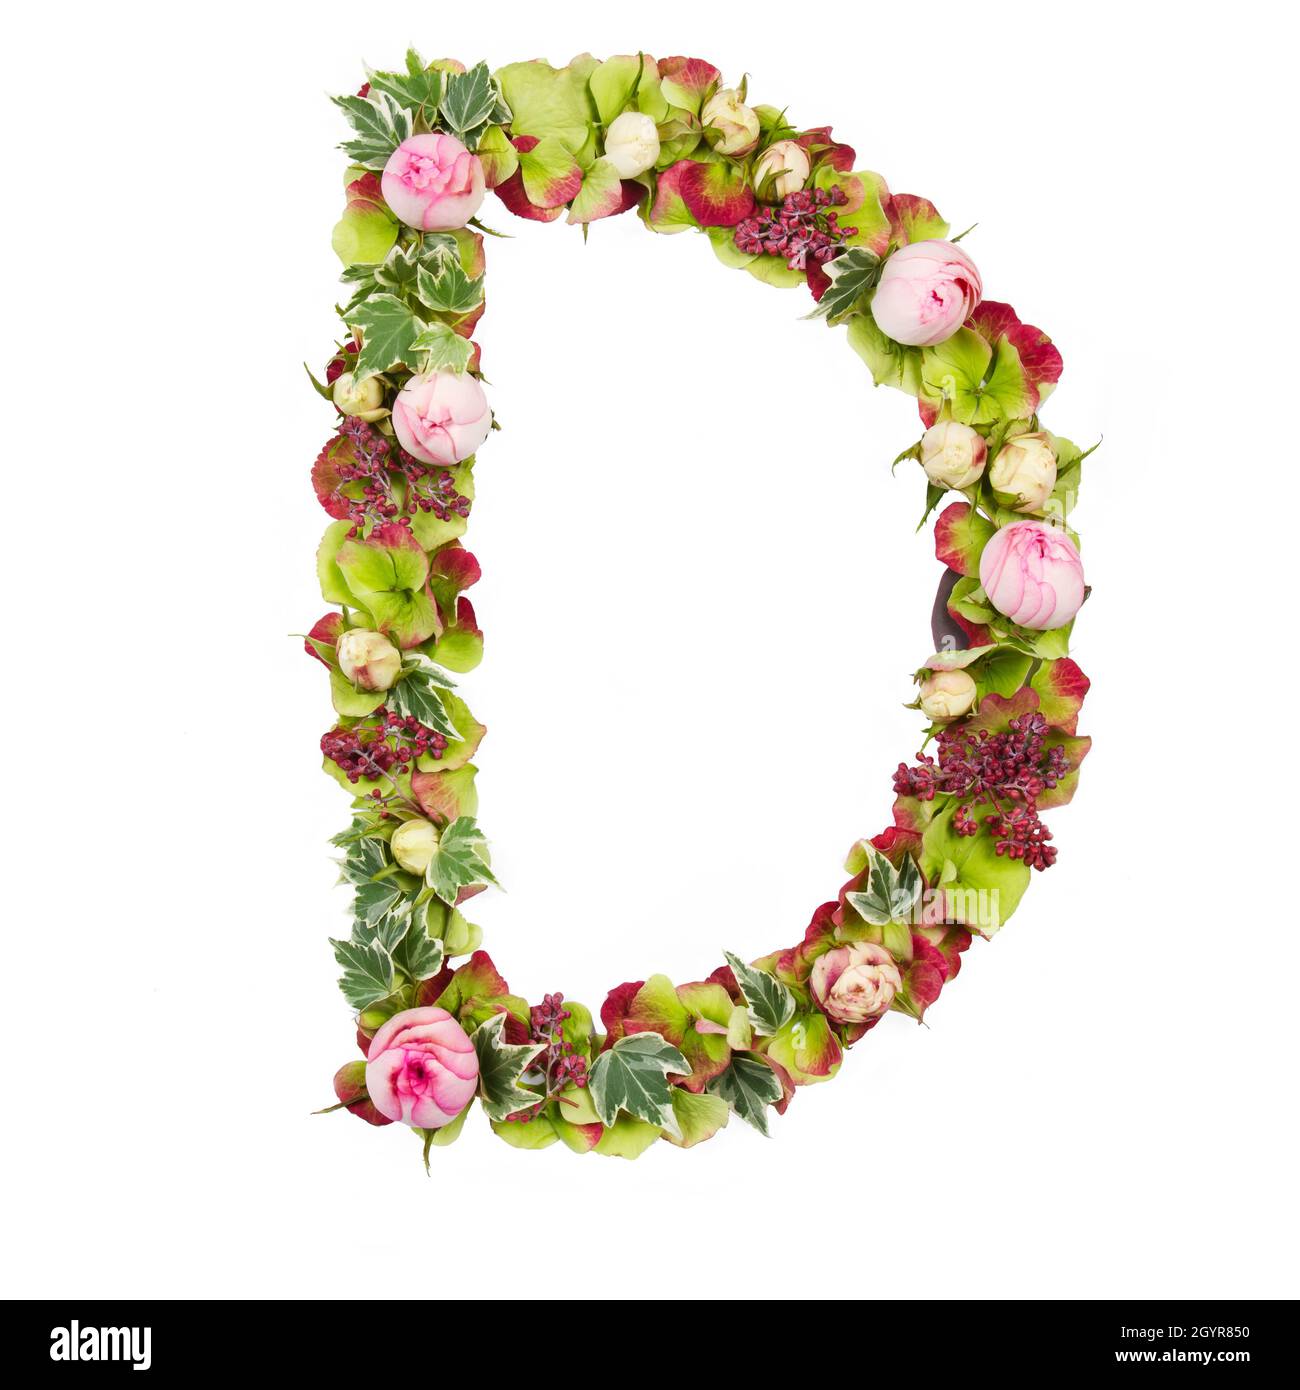 Capital Letter D Part of a set of letters, Numbers and symbols of the Alphabet made with flowers, branches and leaves on white background Stock Photo